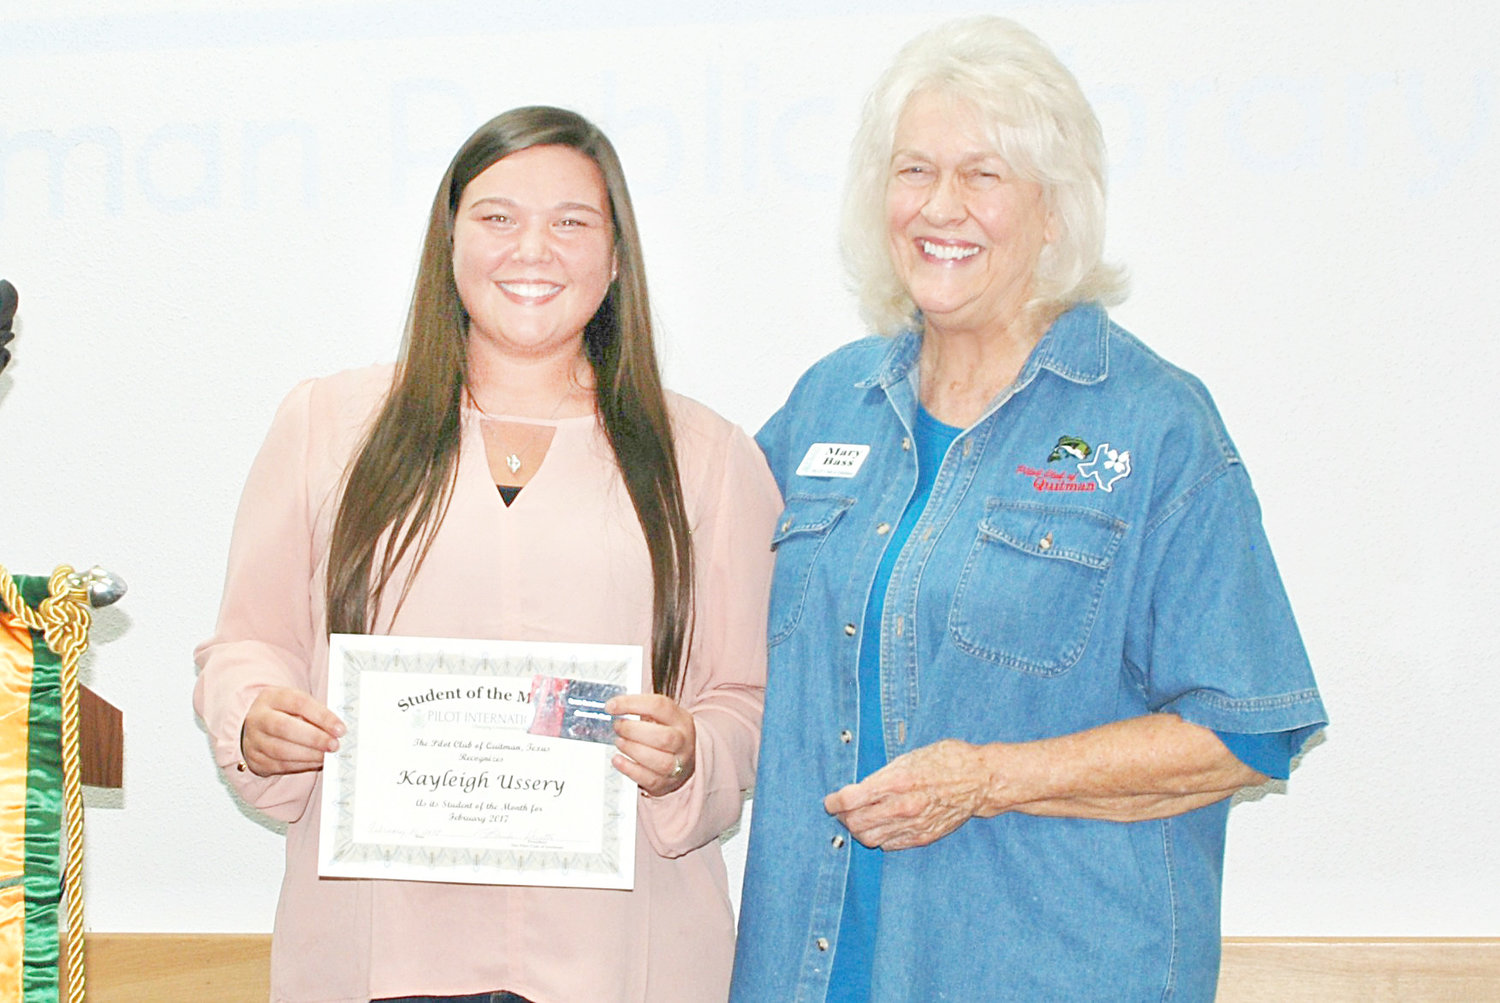 Quitman Pilot Club member Mary Bass presents Kayleigh Ussery with a certificate for Student of the Month at the club’s February meeting. Ussery is a Quitman High School senior and the daughter of Tony and Kim Ussery.  She has been a member of the National Honor Society for the last two years and is the lead designer and editor of the yearbook. The February Student of the Month has participated in University Interscholastic League competitions for three years in Floriculture.  After graduation Ussery plans on attending Baylor University to pursue a degree in psychology.